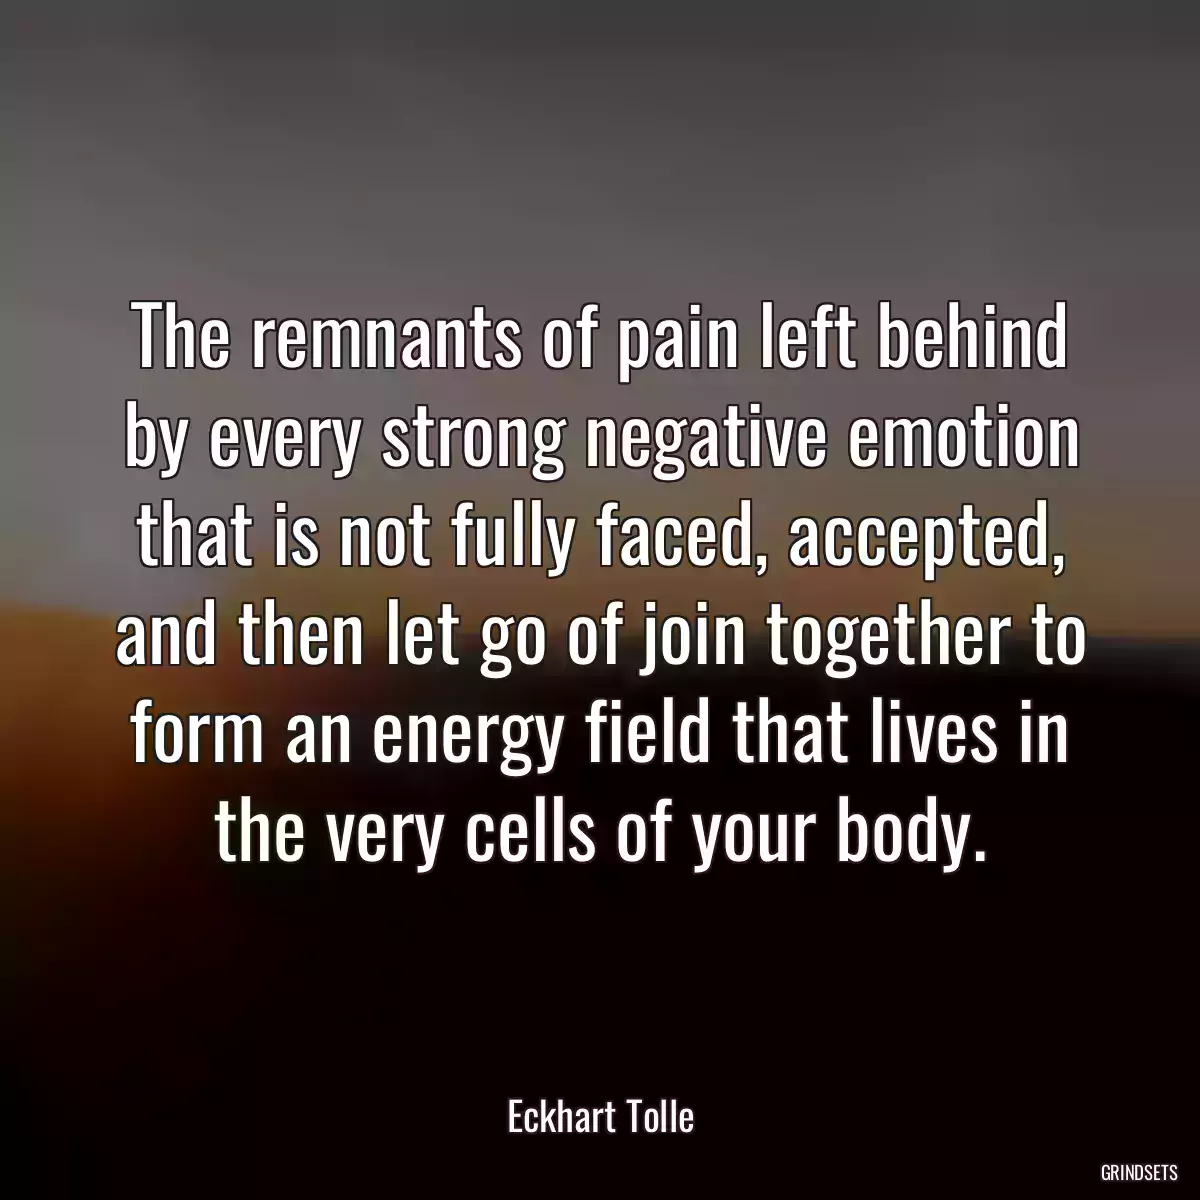 The remnants of pain left behind by every strong negative emotion that is not fully faced, accepted, and then let go of join together to form an energy field that lives in the very cells of your body.